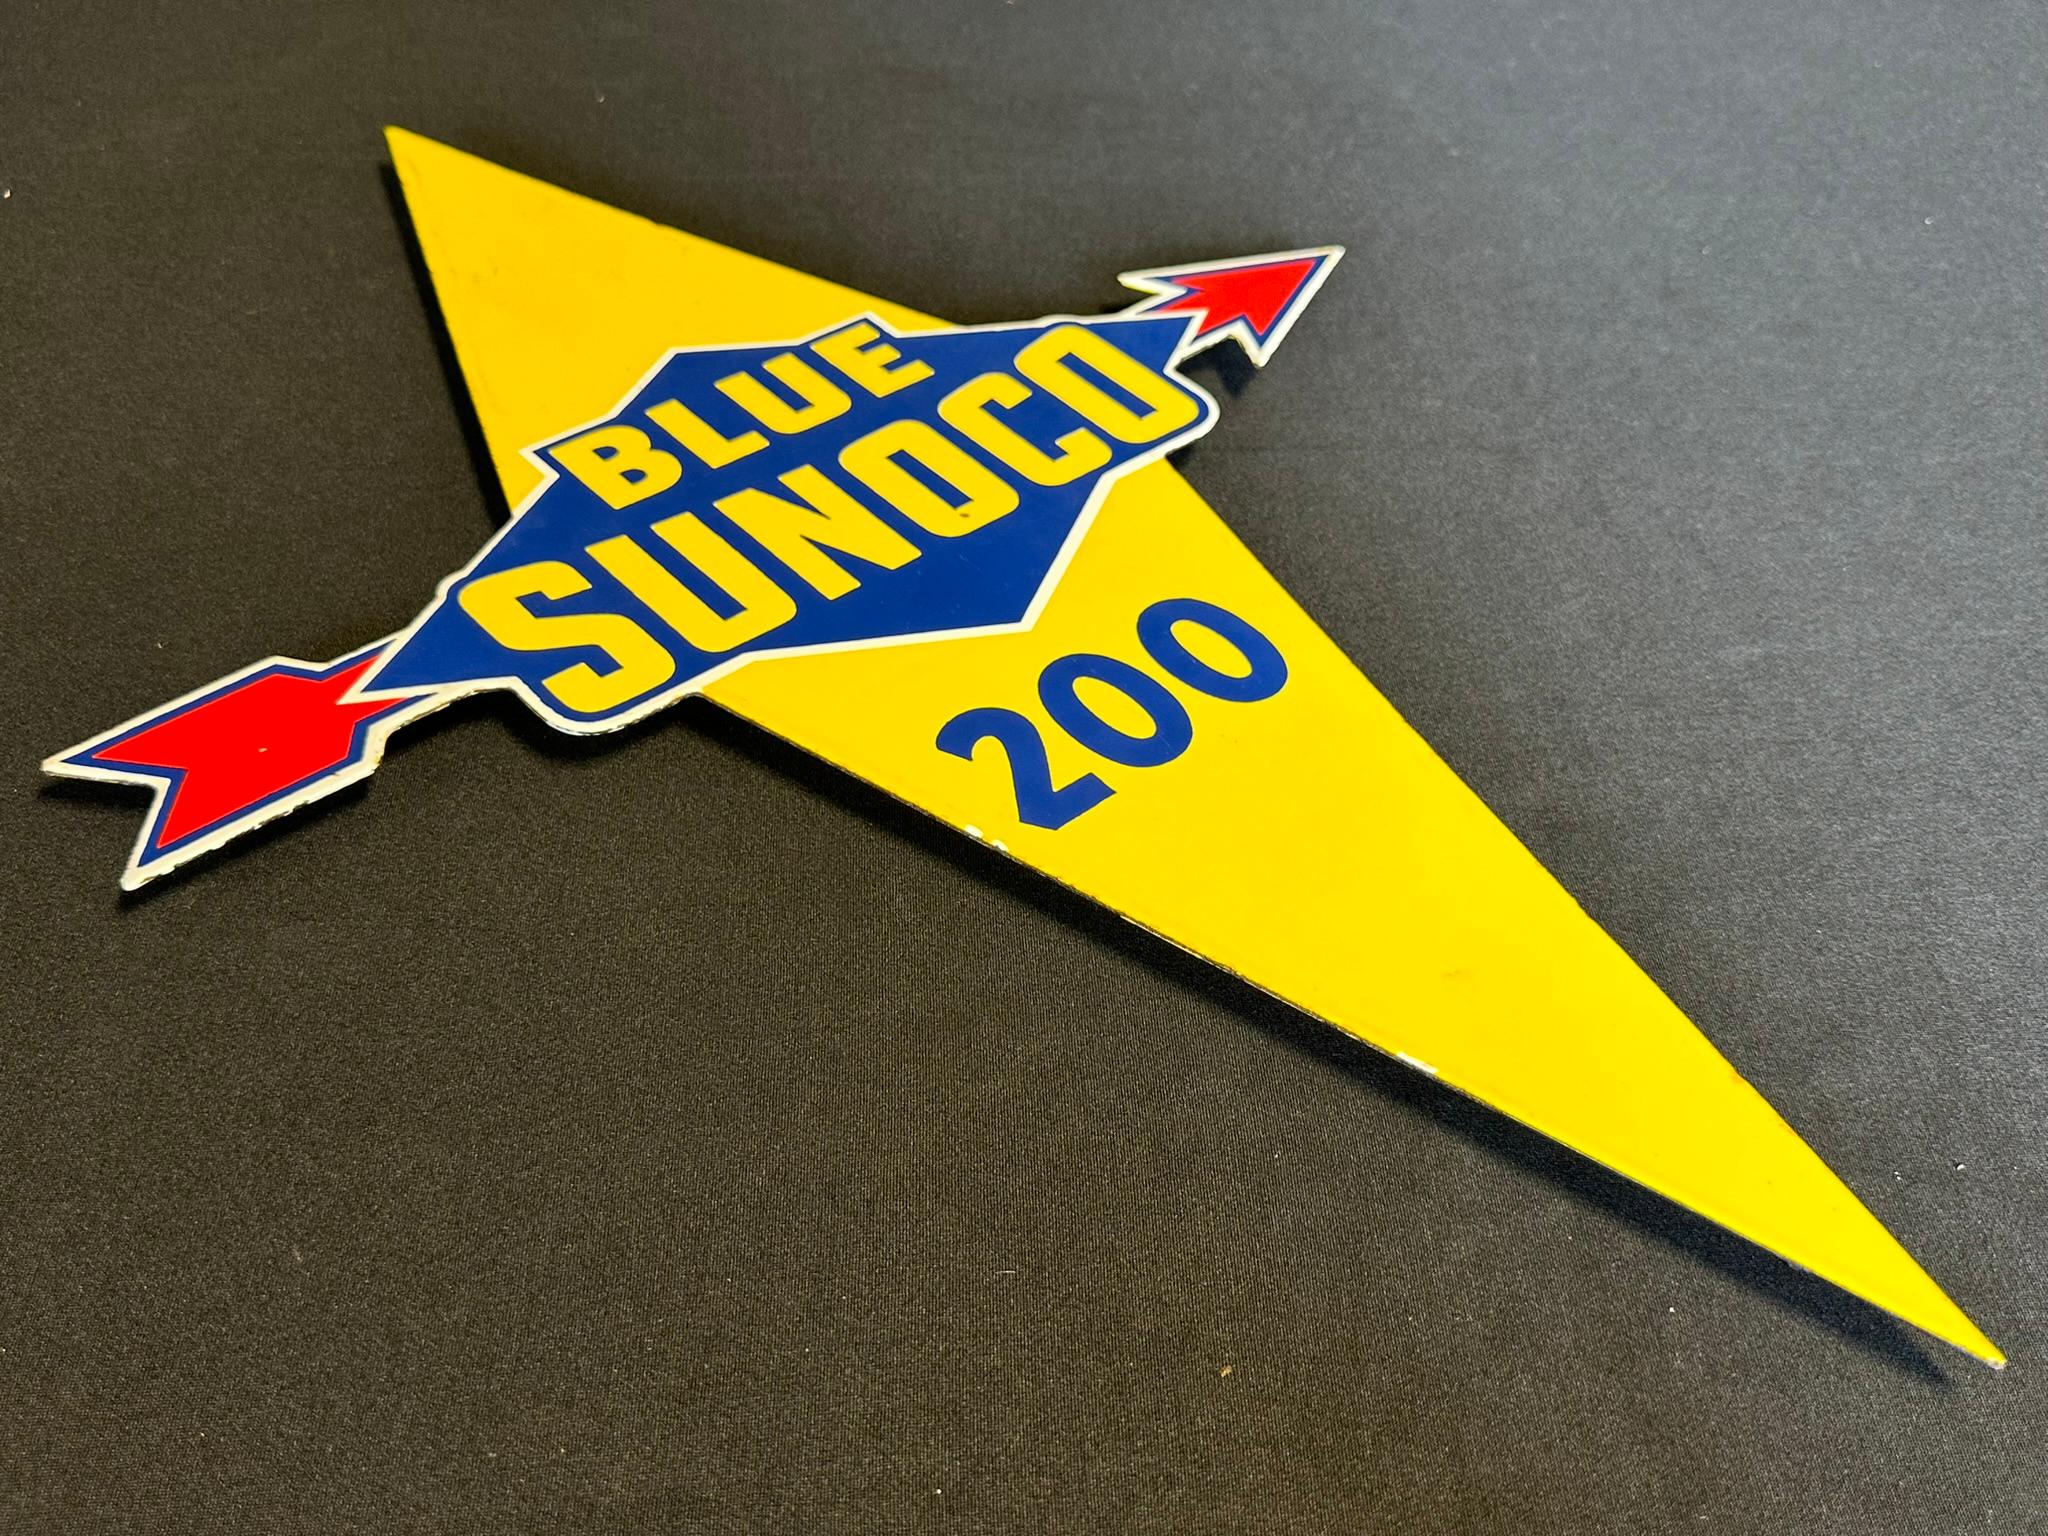 Blue Sunoco 200 Single Sided Porcelain Gas Pump Advertising Sign